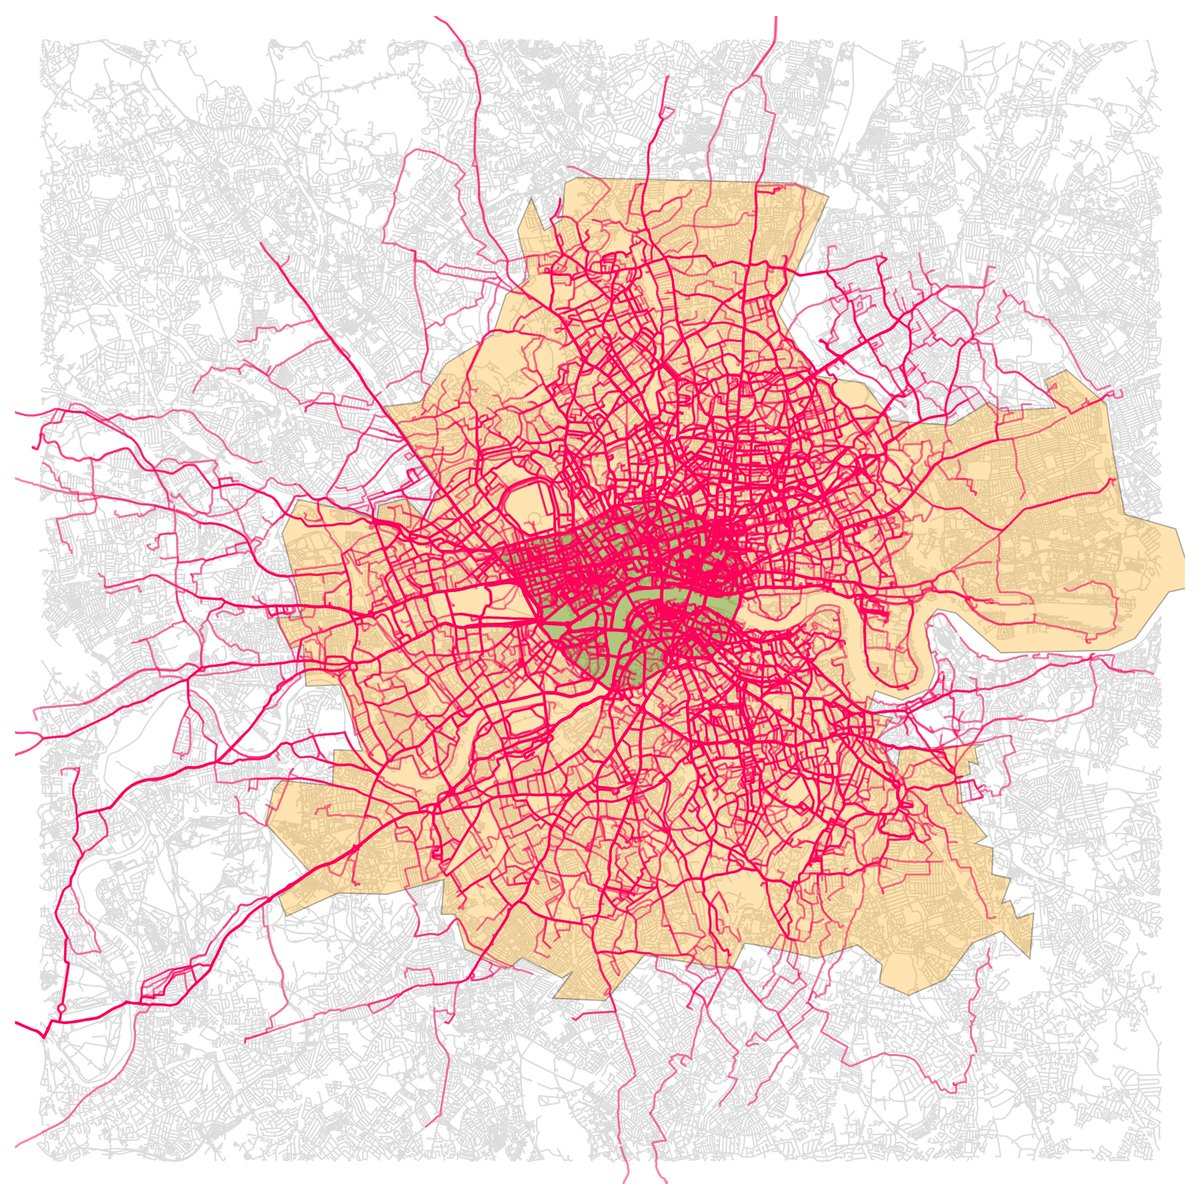 We analysed ~19,000 km of GPS data from our cargo bikes. Our average moving speed in central london was 15kmh. That's 3.5kmh faster than traffic speeds in 2018. Note that congestion this year was up 153% compared to last year so likely even faster..2/